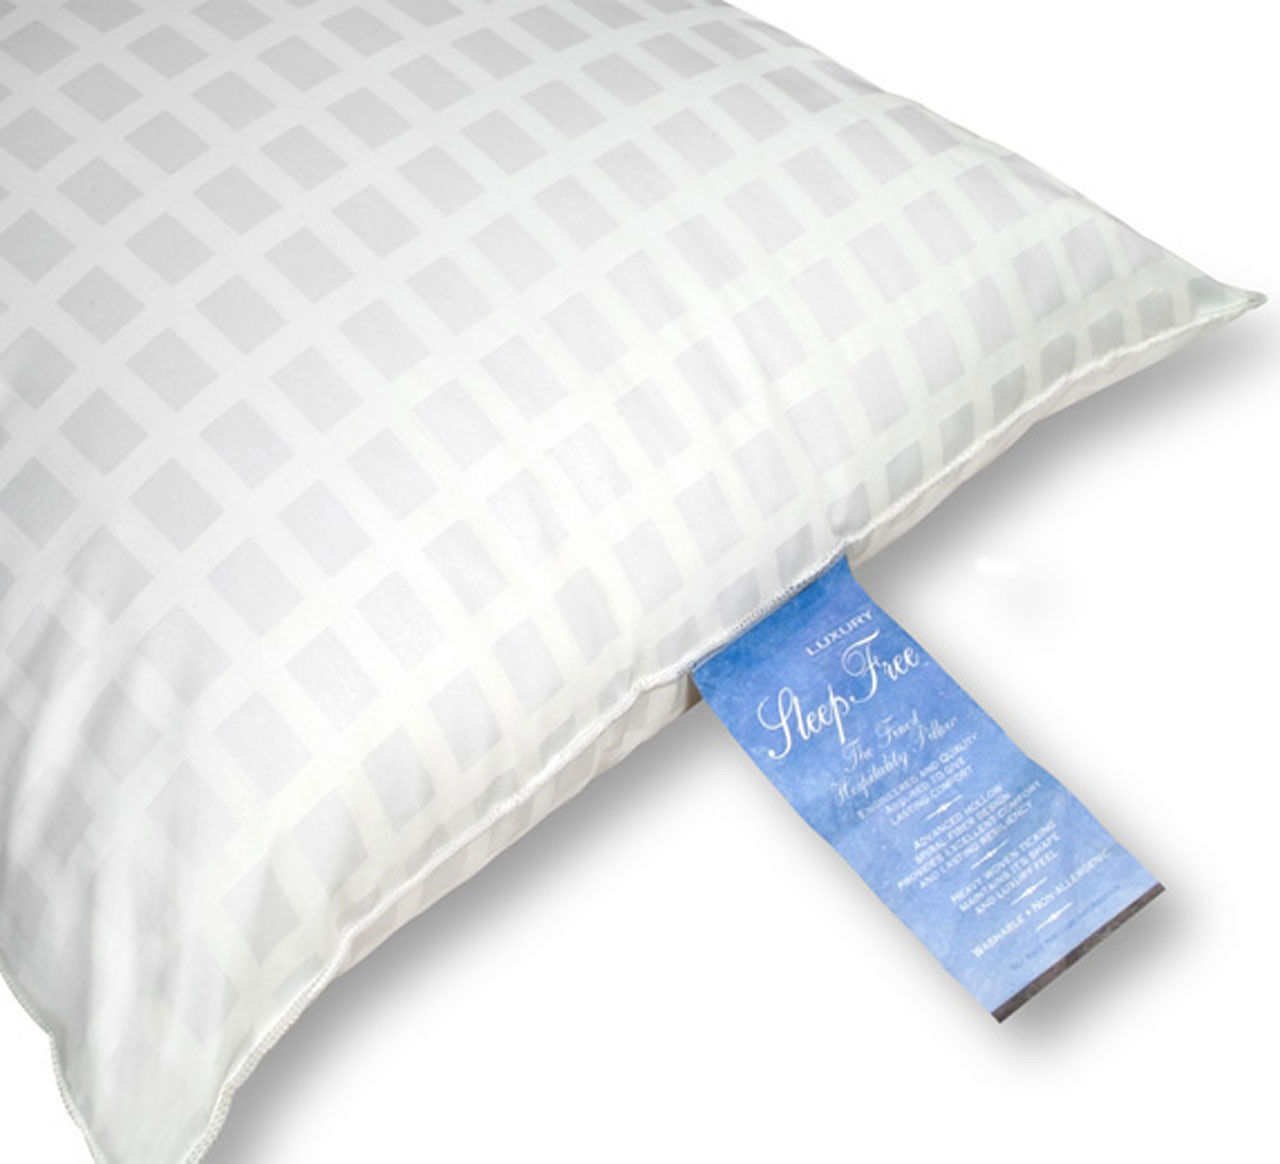 Can you specify the type of fiberfill used in the Sleep Free Pillow?